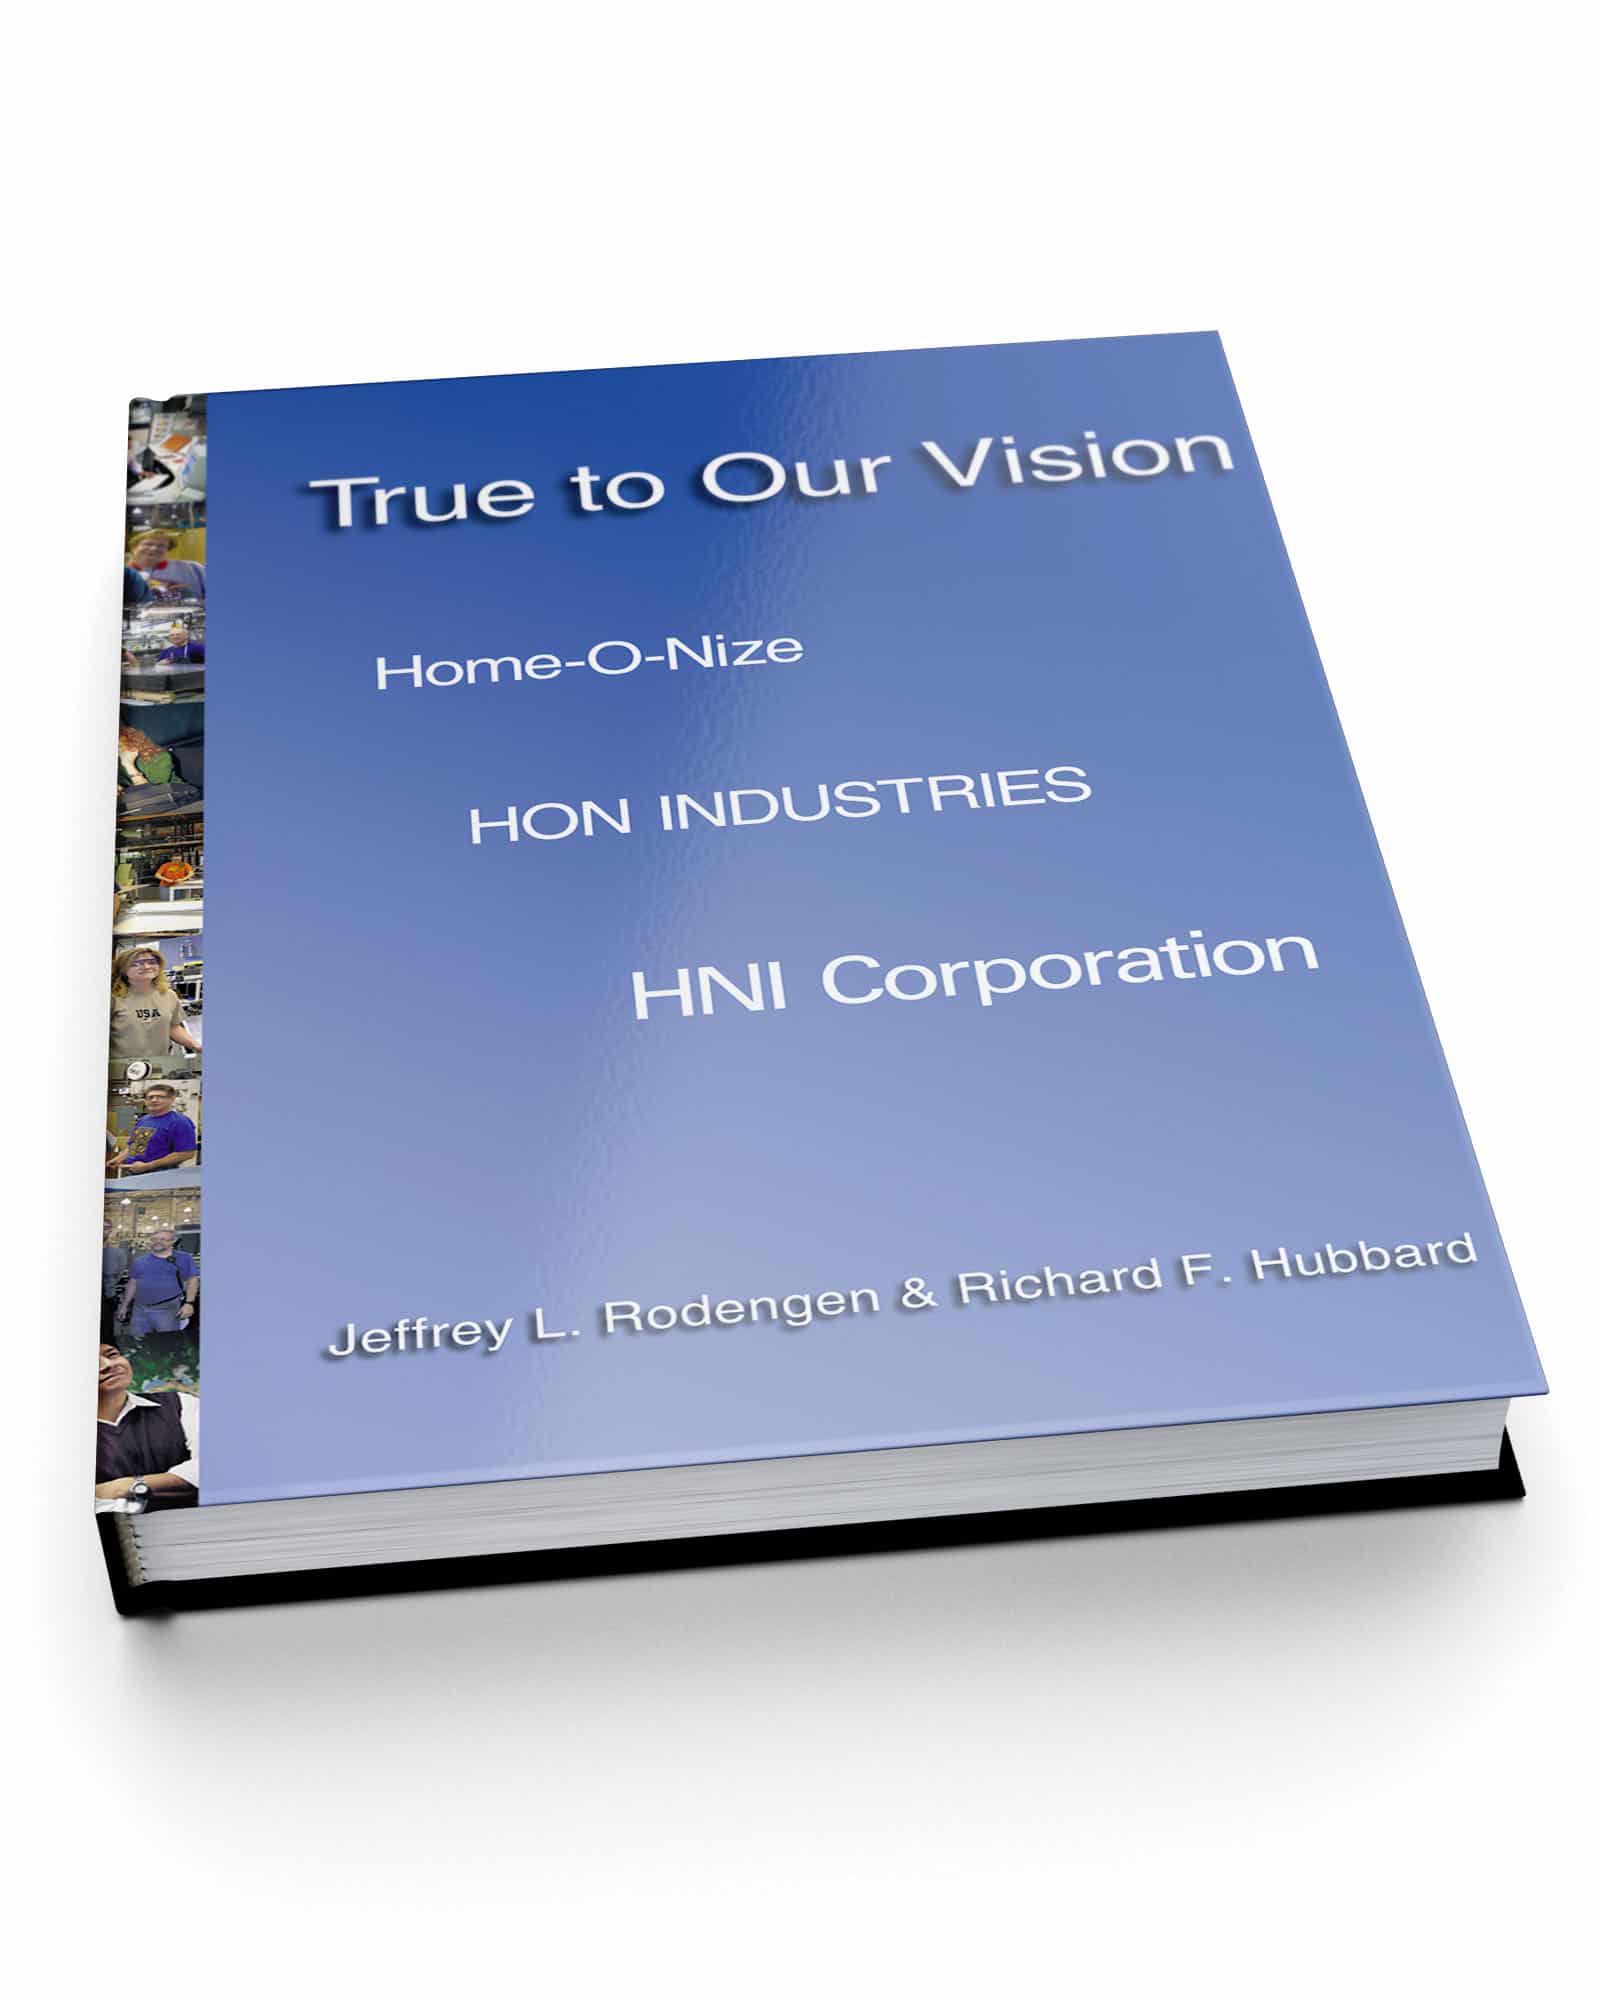 True to Our Vision: HON Industries